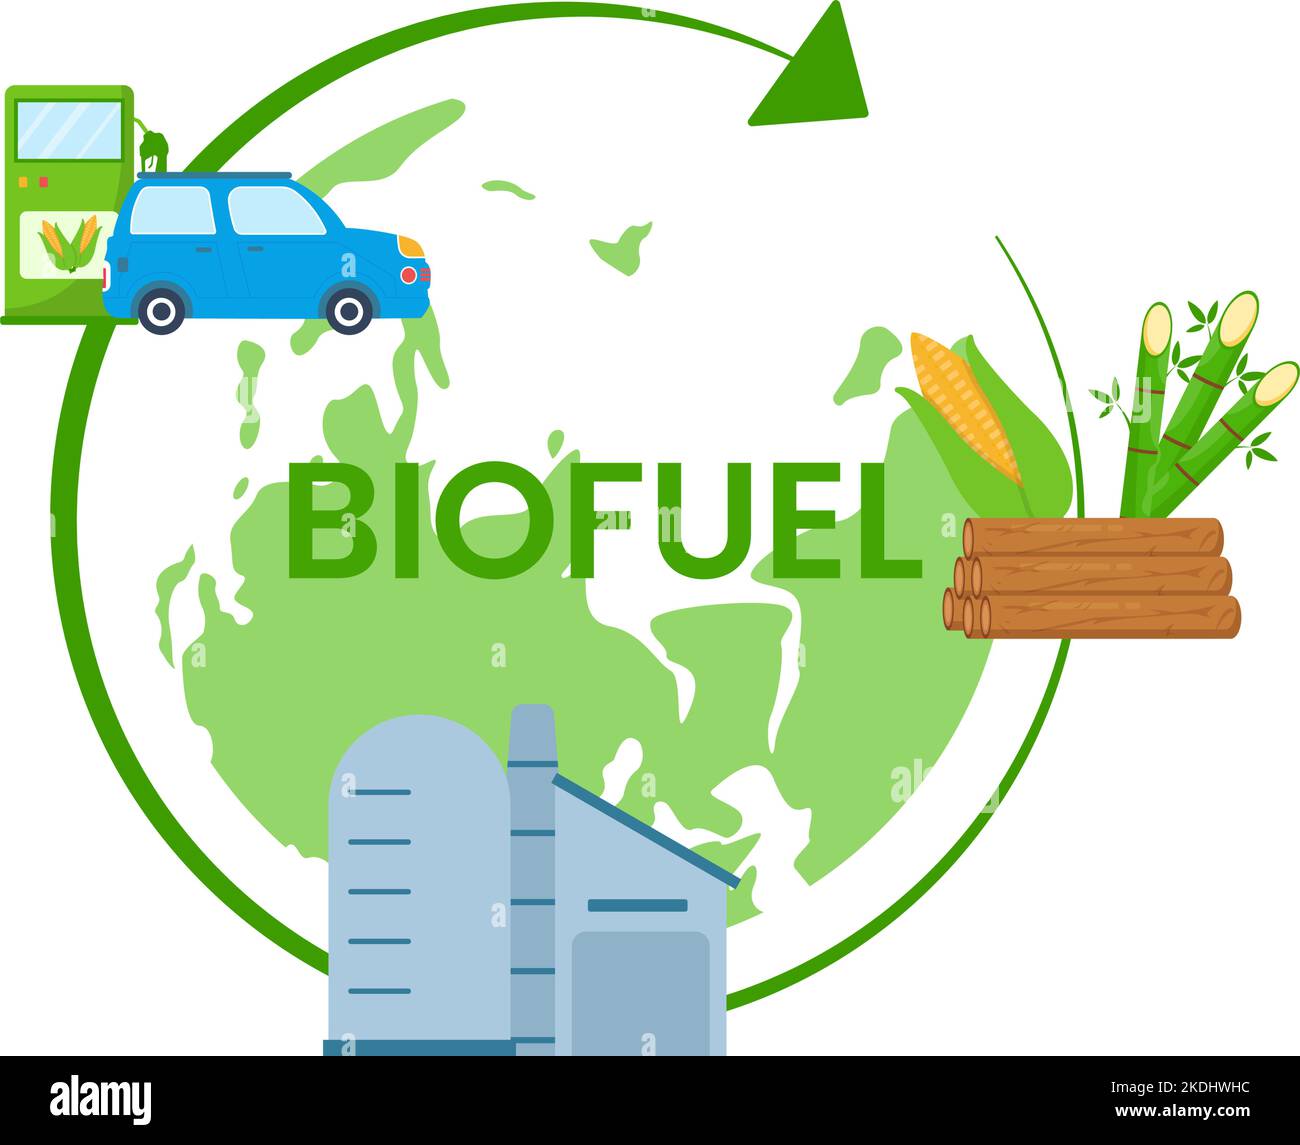 Biofuel Life Cycle of Natural Materials and Plants with Green Barrels or Biogas Production Energy in Flat Cartoon Hand Drawn Templates Illustration Stock Vector